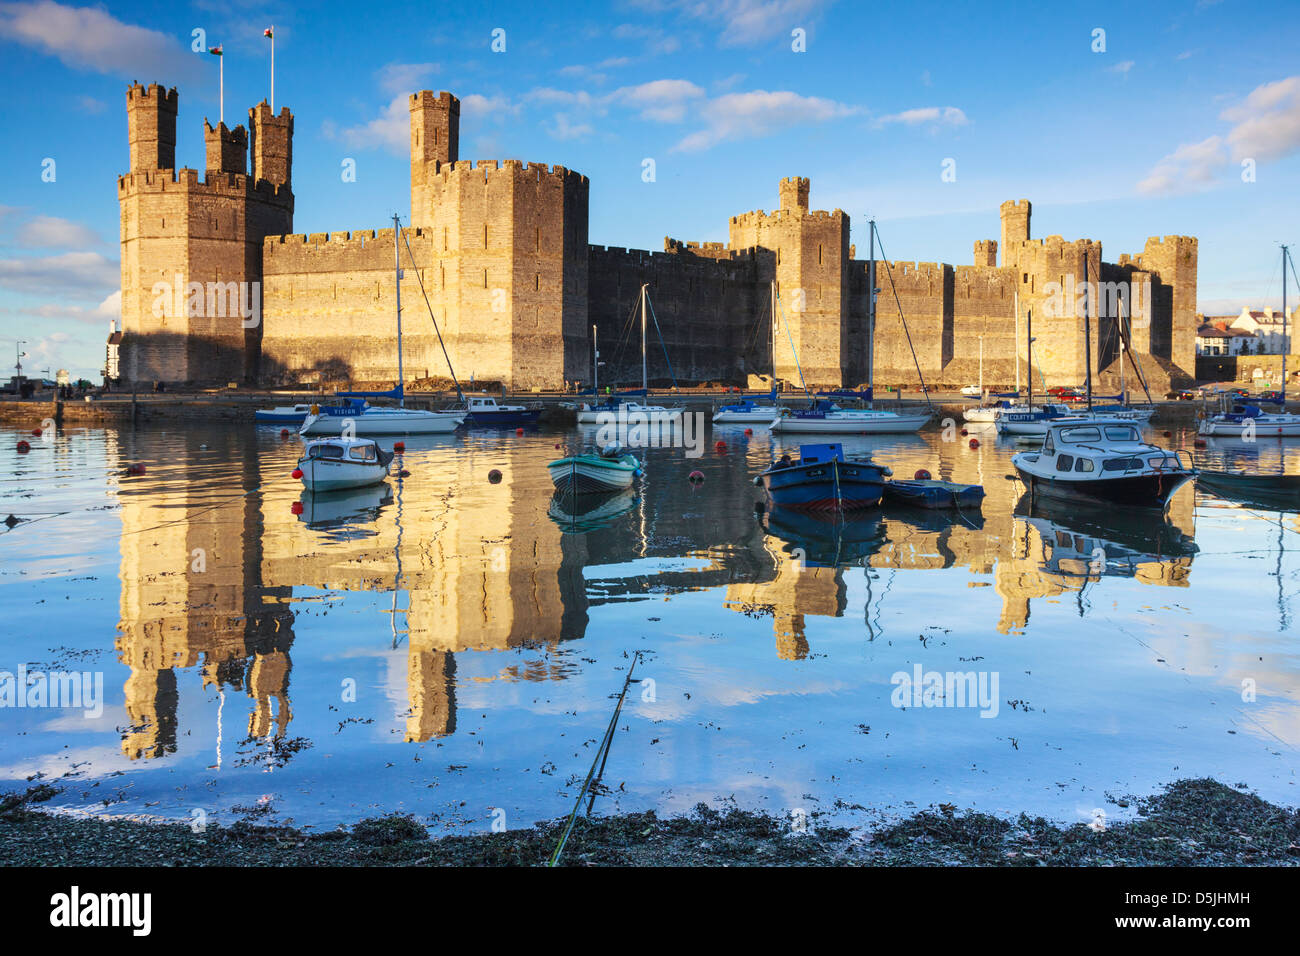 Caernarfon Castle in North Wales captured at hight tide Stock Photo